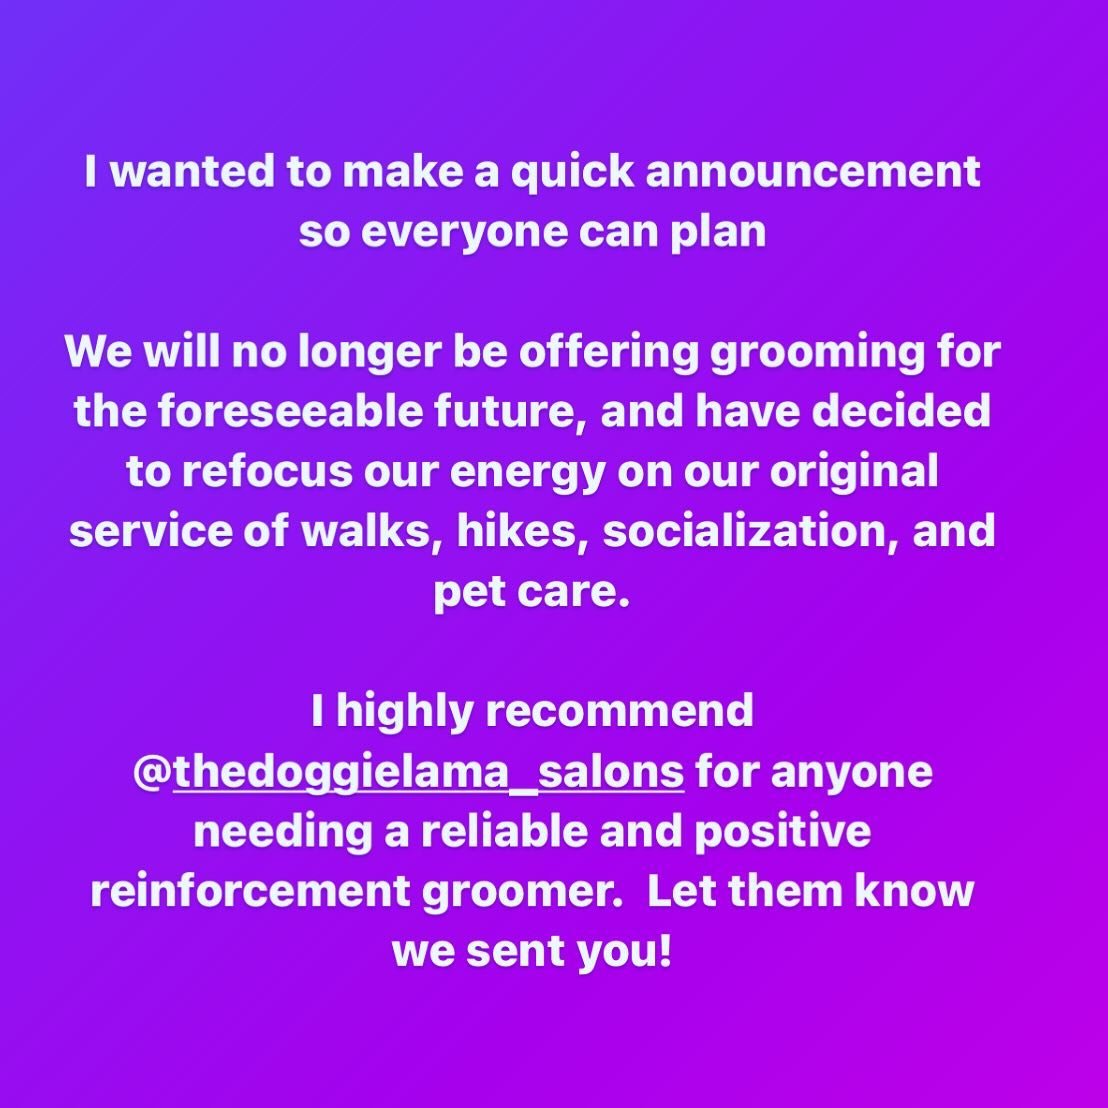 Let @thedoggielama_salons know we sent you!  And thank you for the opportunity to groom your beloved dogs.

#smallbiz #dogwalking #rva #grooming